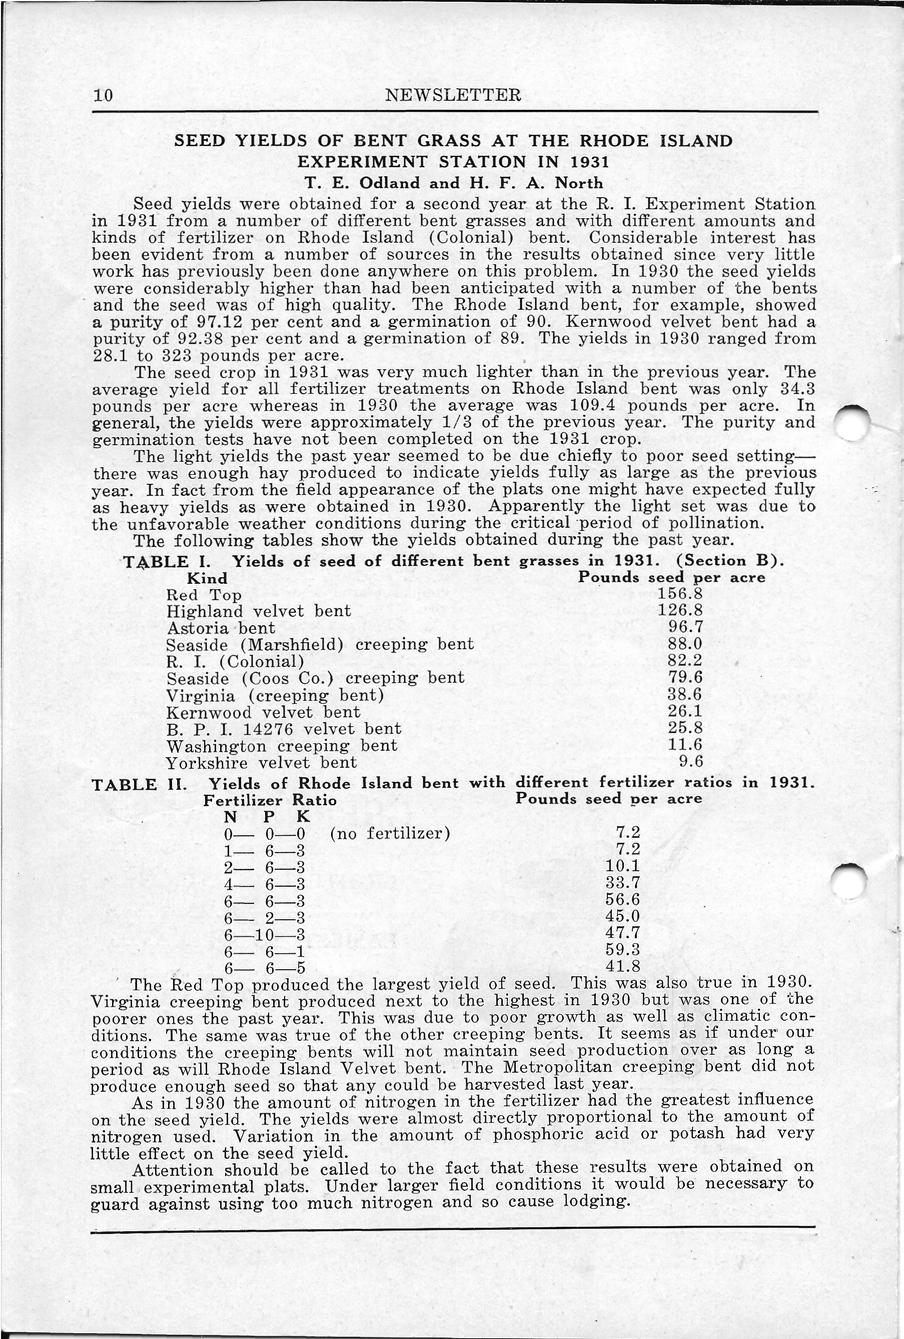 SEED YIELDS OF BENT GRASS AT THE RHODE ISLAND EXPERIMENT STATION IN 1931 T. E. Odland and H. F. A. North Seed yields were obtained for a second year at the R. I. Experiment Station in 1931 from a number of different bent grasses and with different amounts and kinds of fertilizer on Rhode Island (Colonial) bent.